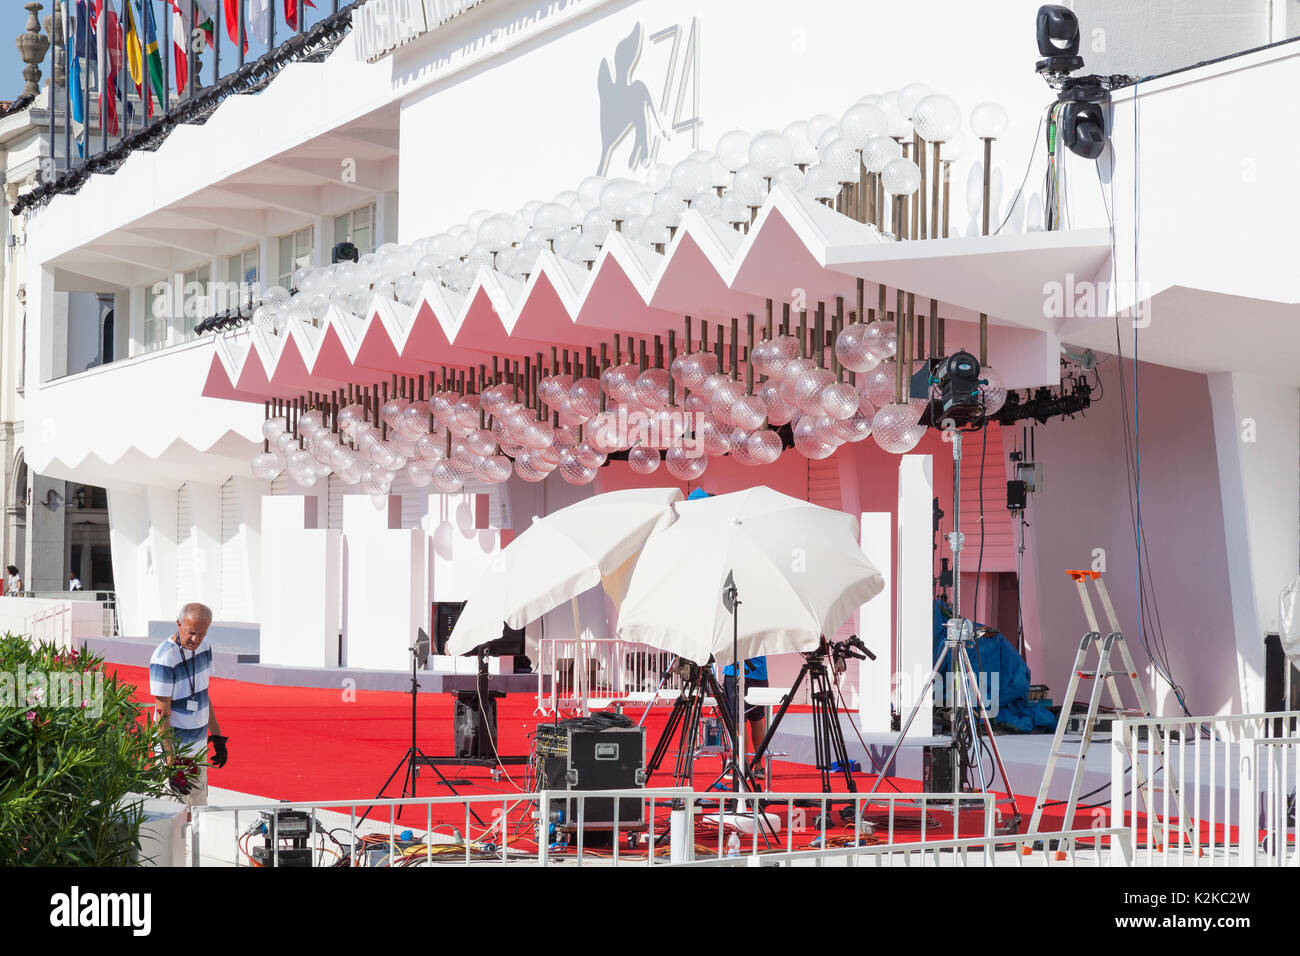 Lido, Venice, Italy. 30th Aug, 2017. Venues for the 2017 Film Festival after last minute preparations and installations and before the crowds arrive for the opening of the festival. The media setting up on the red carpet at the entrance to the Mostra Internazionale d'Arte Cinematografica. Stock Photo